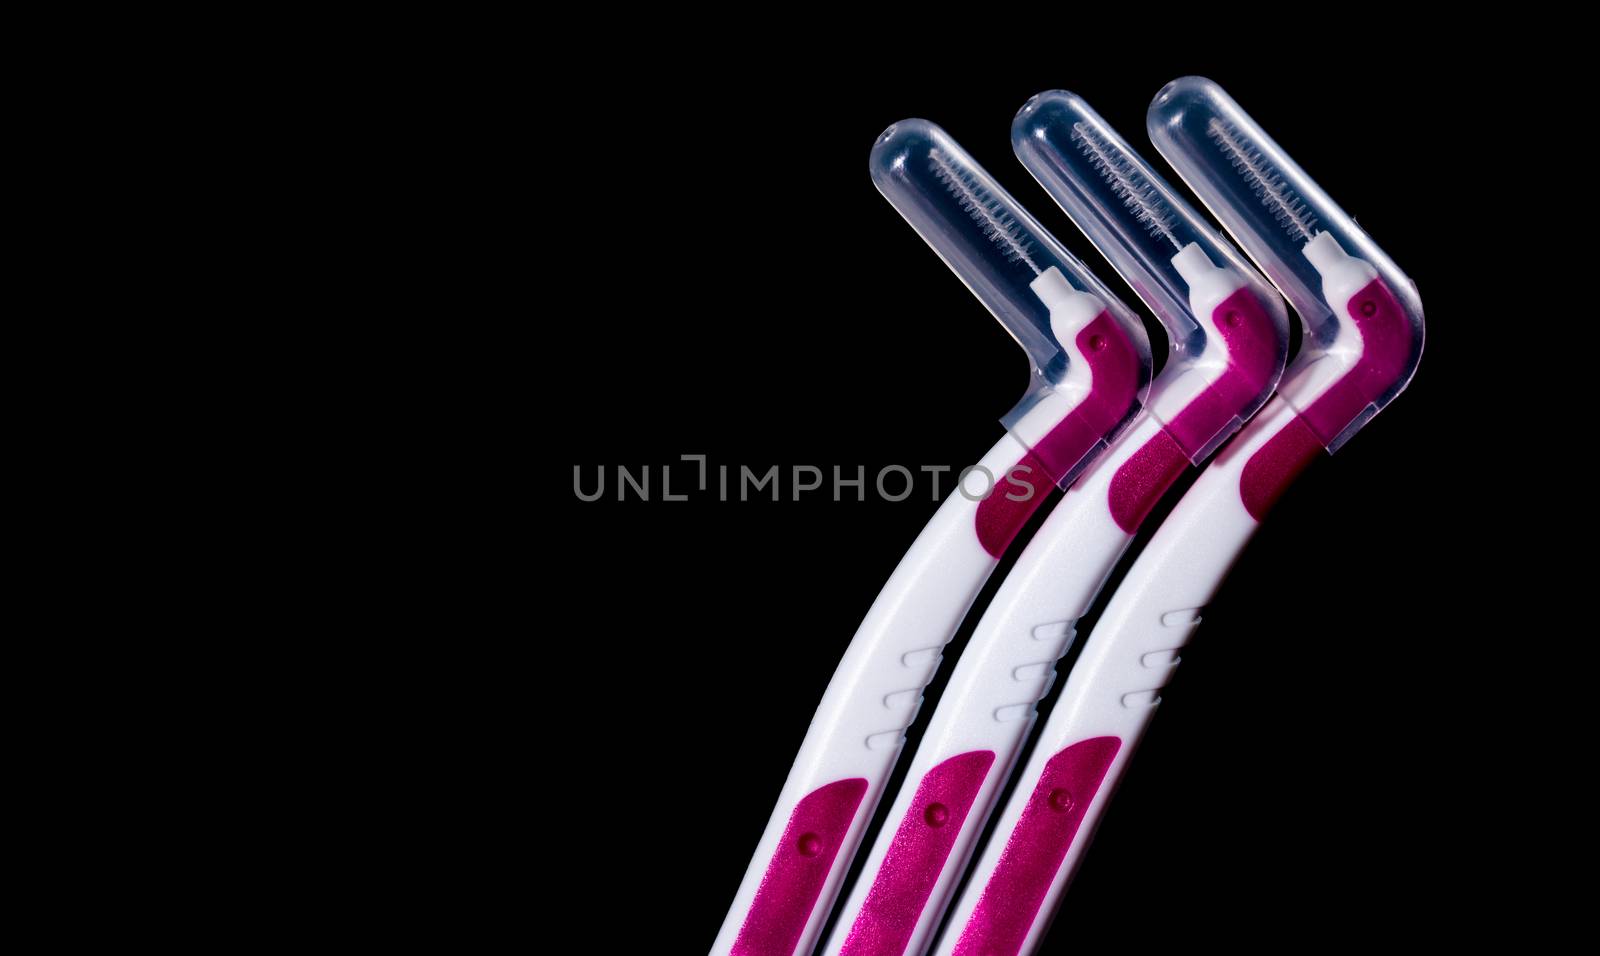 Three interdental brush with cover isolated on black background with copy space for text. Dental care concept. Equipment for get rid of food stuck in teeth